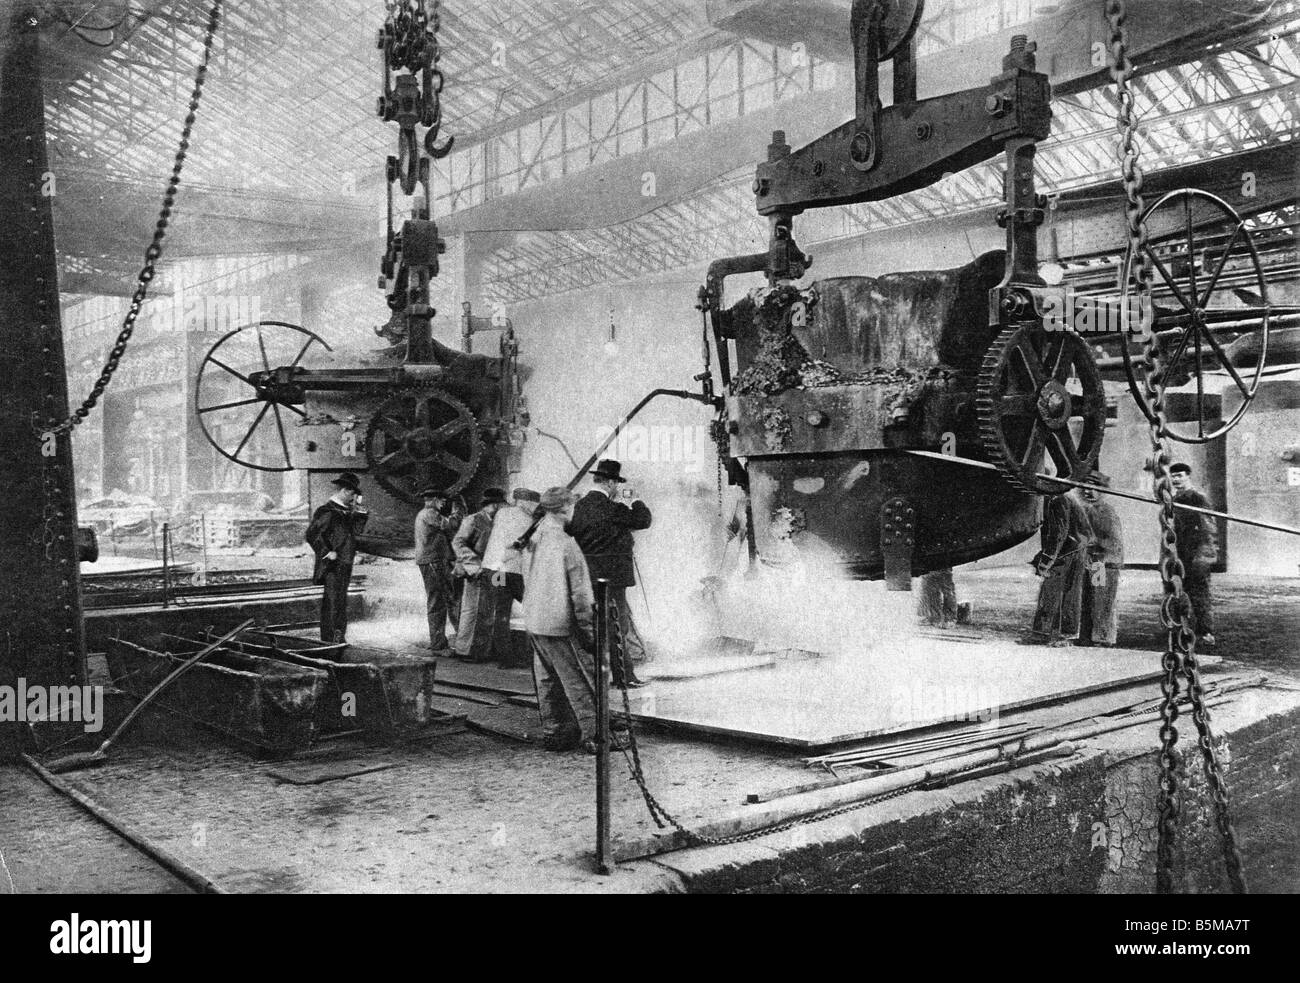 2 G55 R1 1914 1 German cannon factory World War I History World War I Arms industry In a German cannon factory Casting from 2 mo Stock Photo